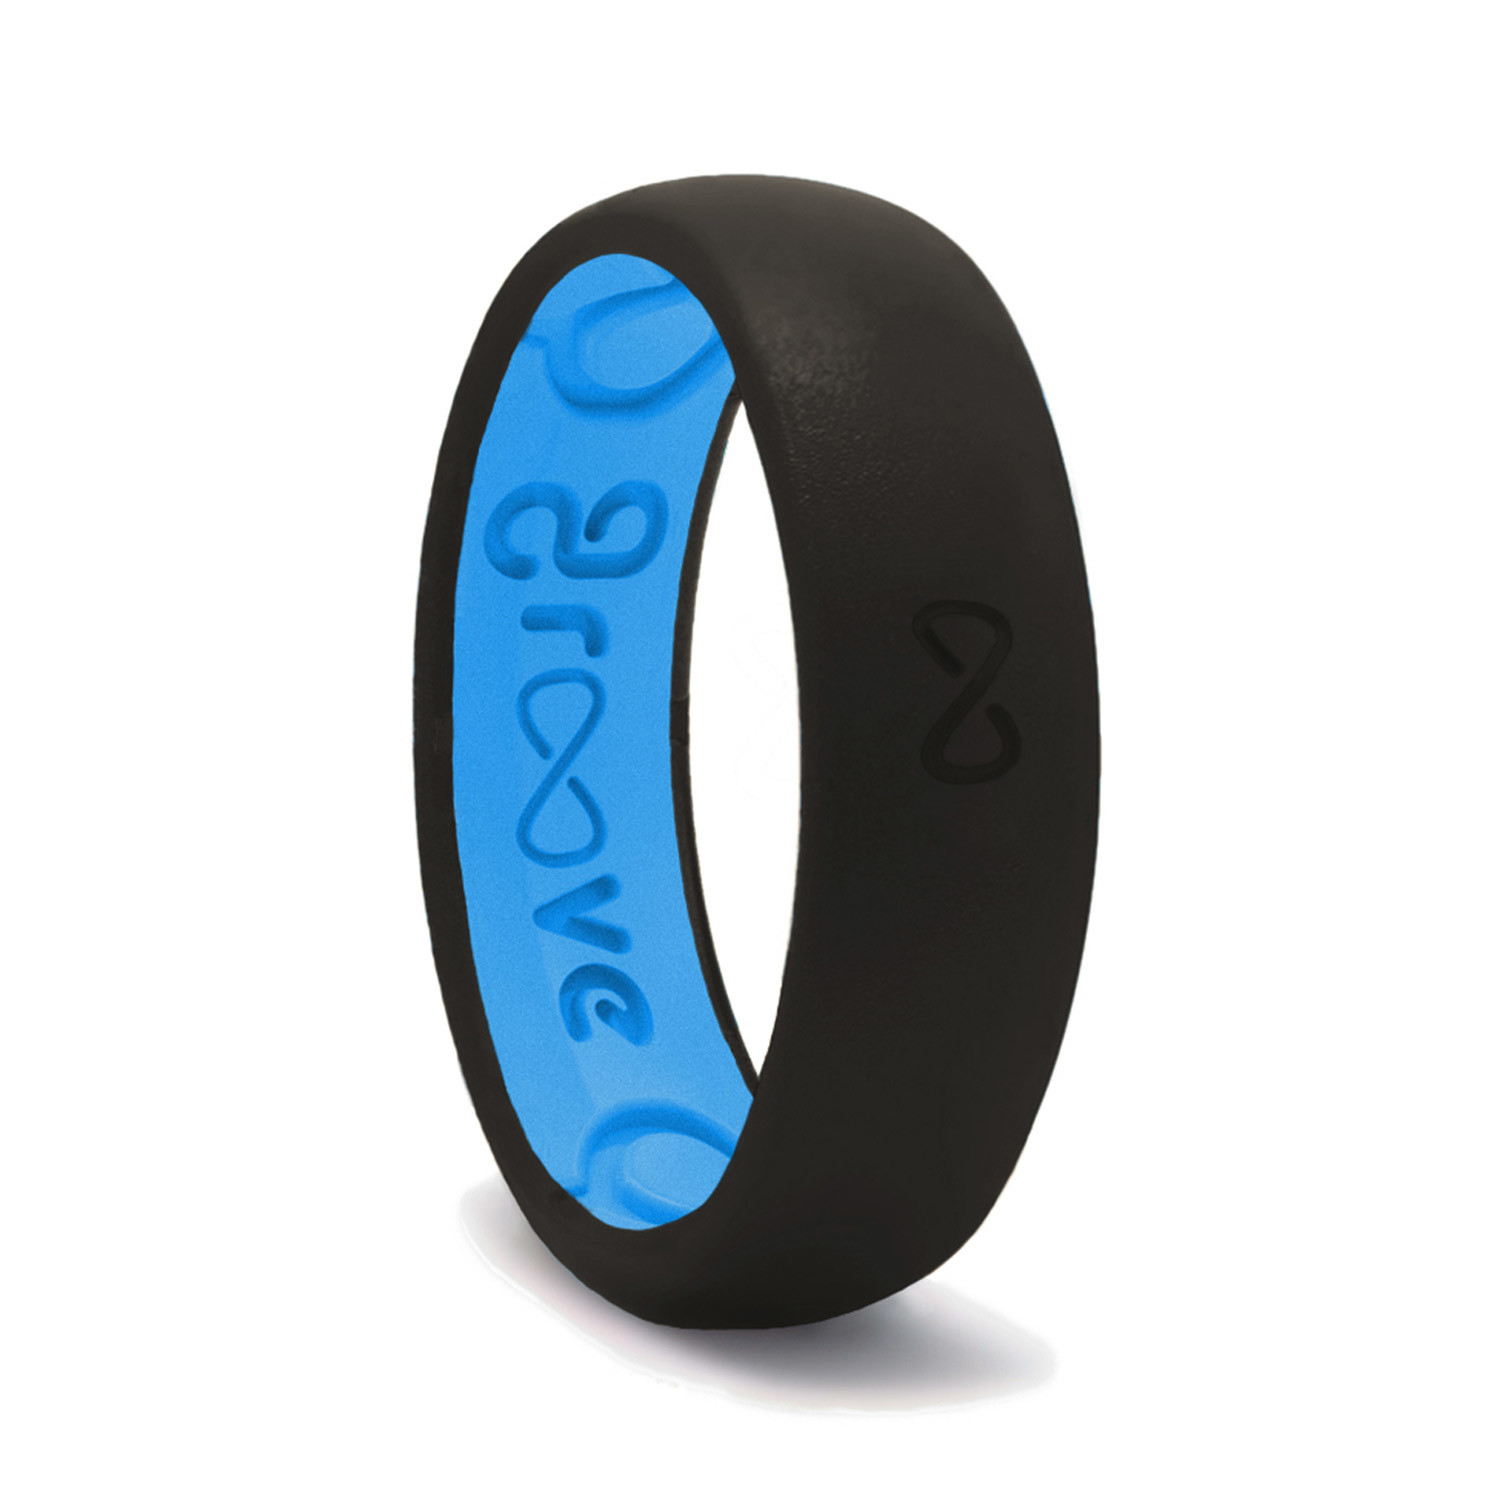 Groove Thin Silicone Ring // Midnight Black (Size 4) - Groove Life ...